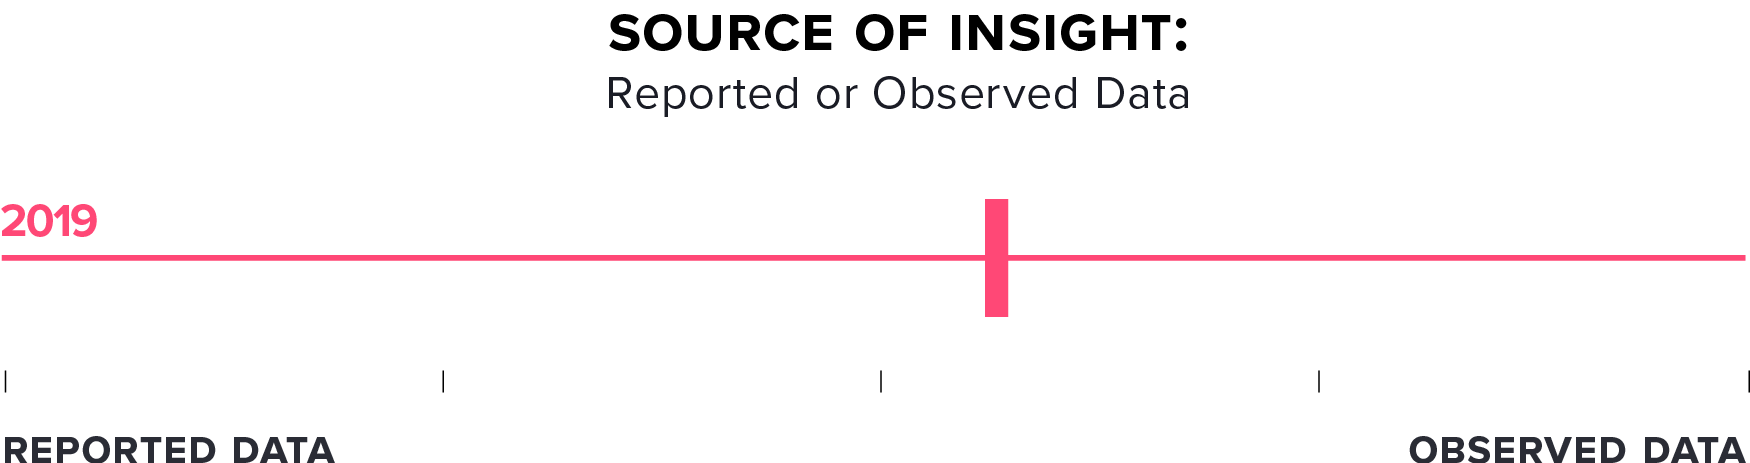 Survey Results Chart: Source of Product Insight: Reported or Observed Data